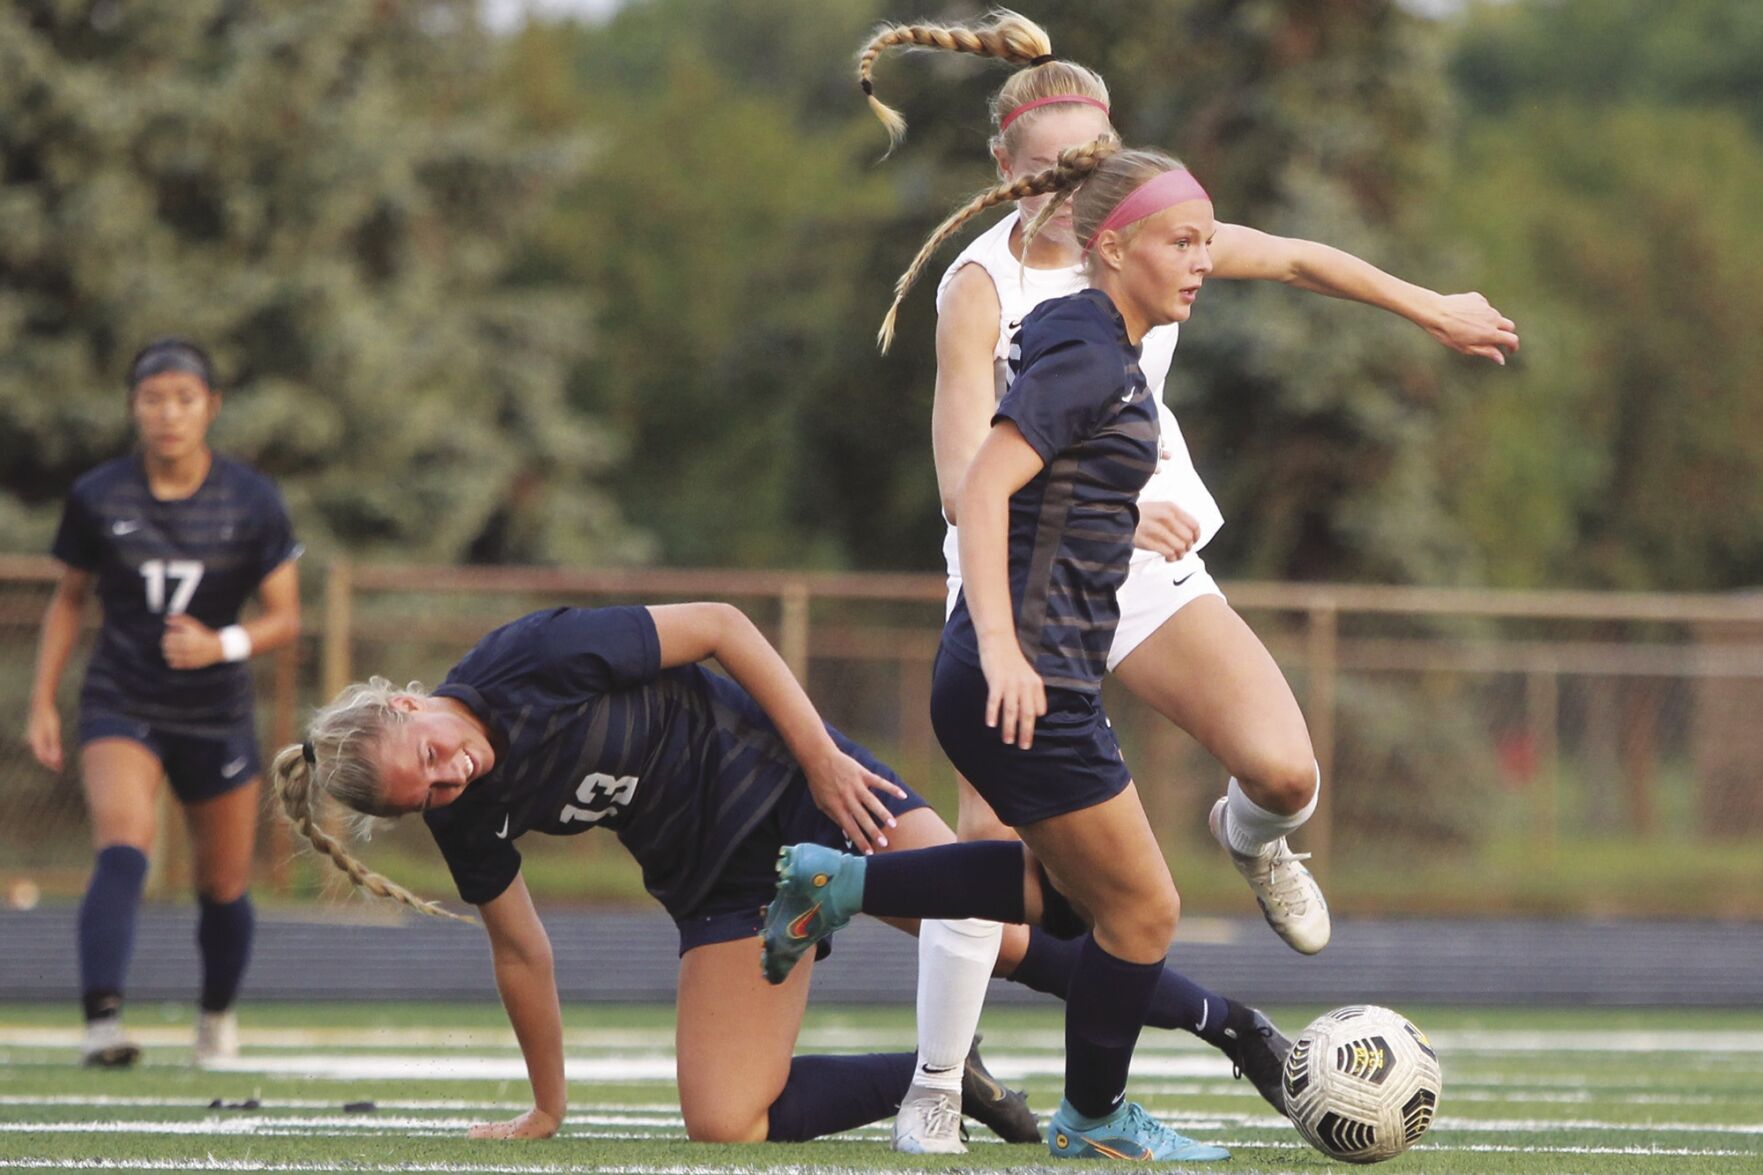 Champlin Park girls soccer face two losses, boys get first win